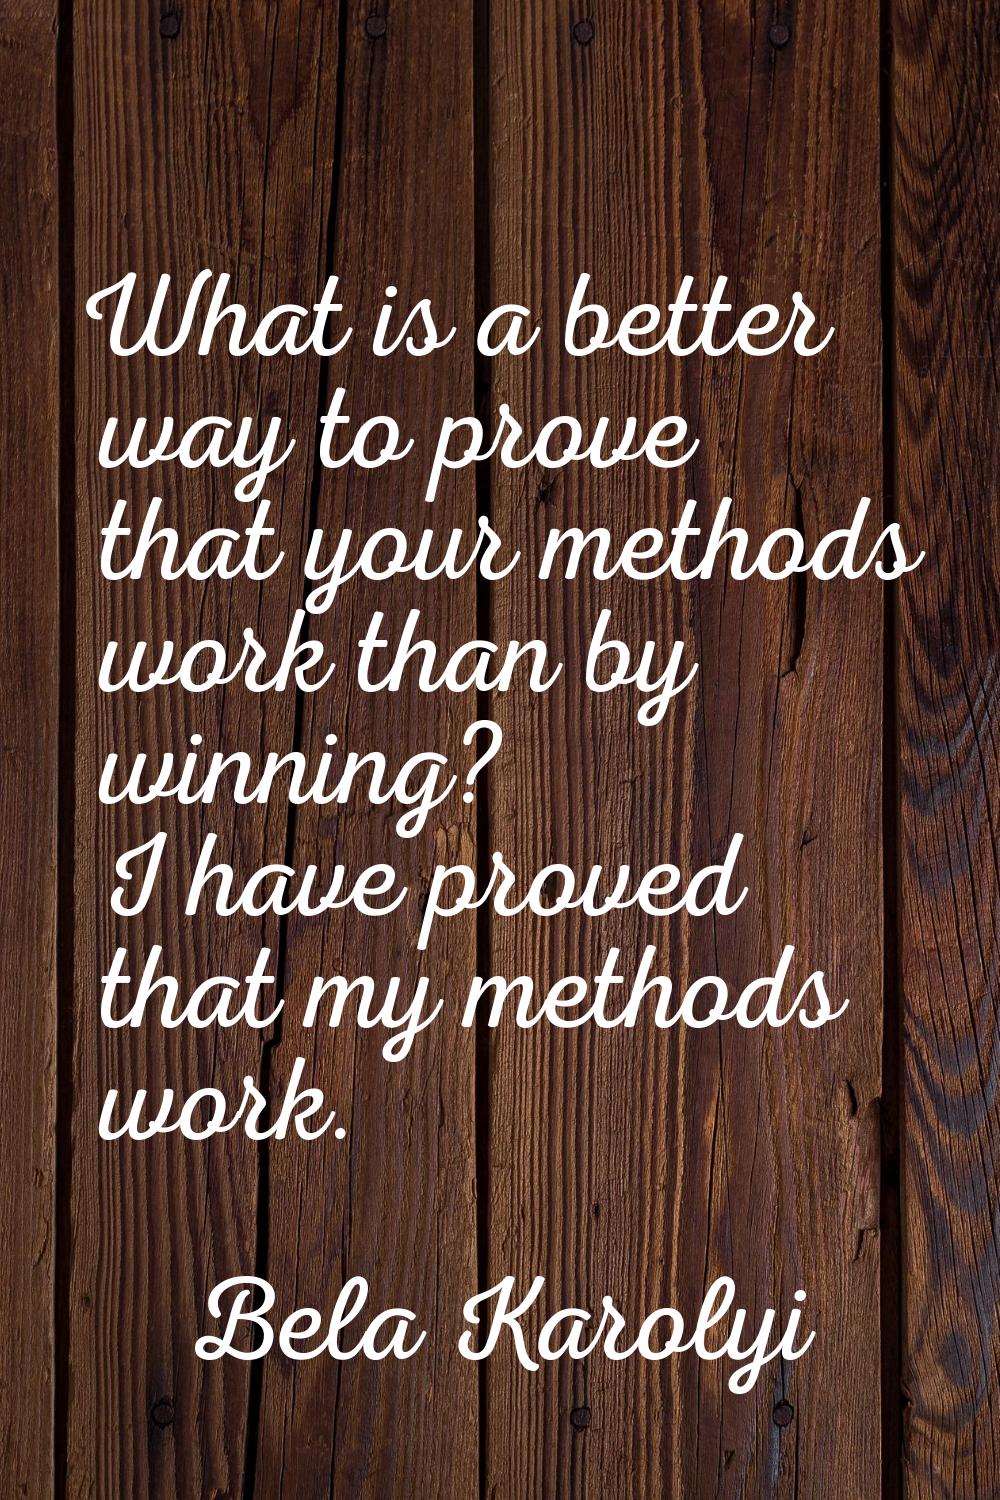 What is a better way to prove that your methods work than by winning? I have proved that my methods